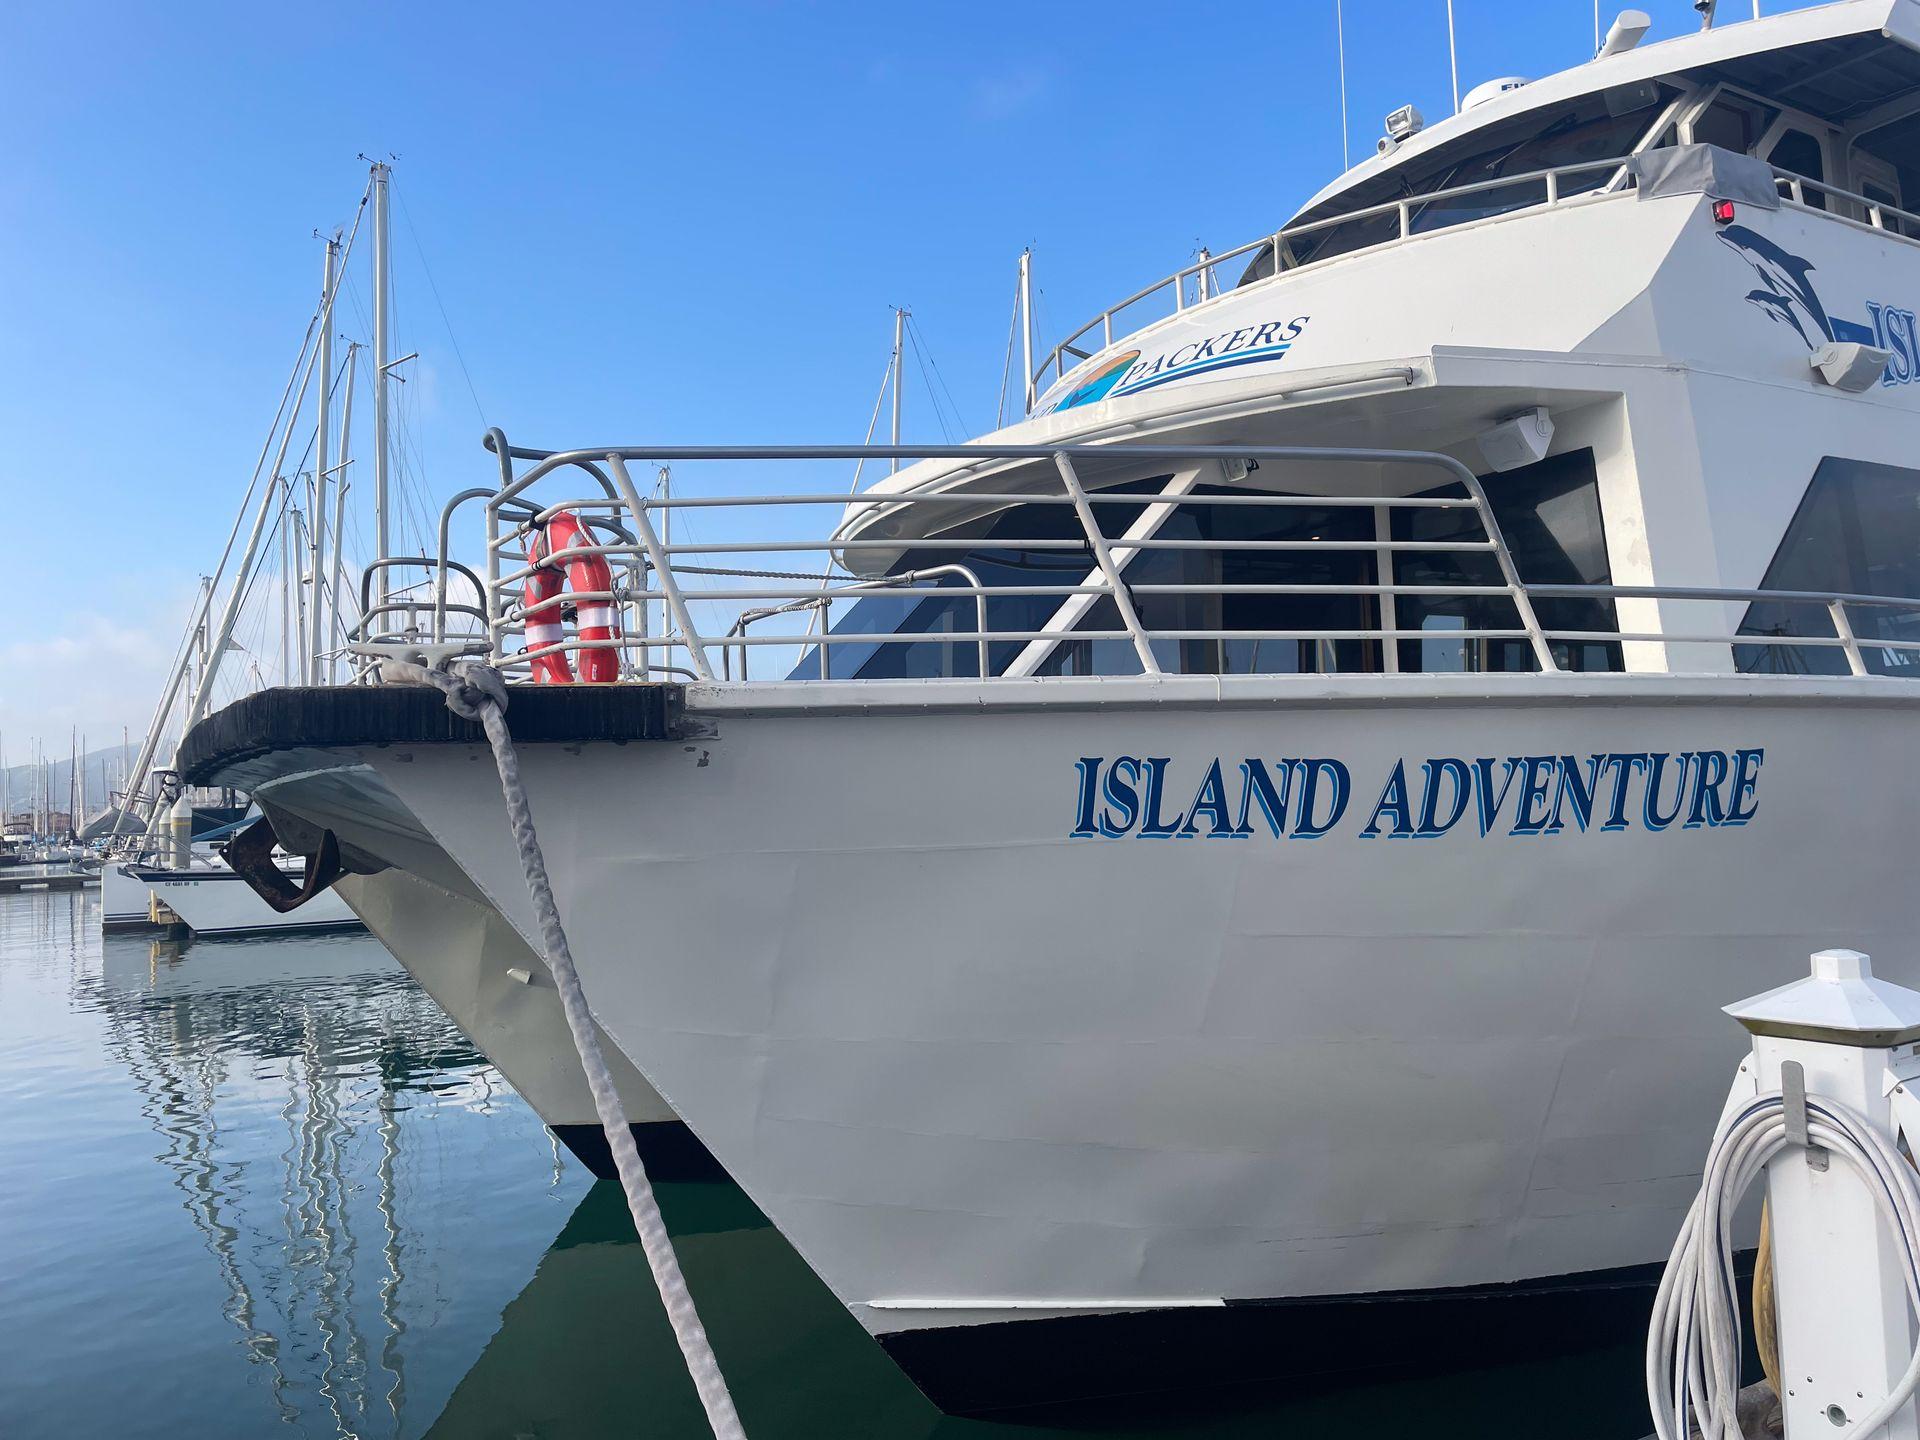 A boat labeled 'Island Adventure' sitting at the dock